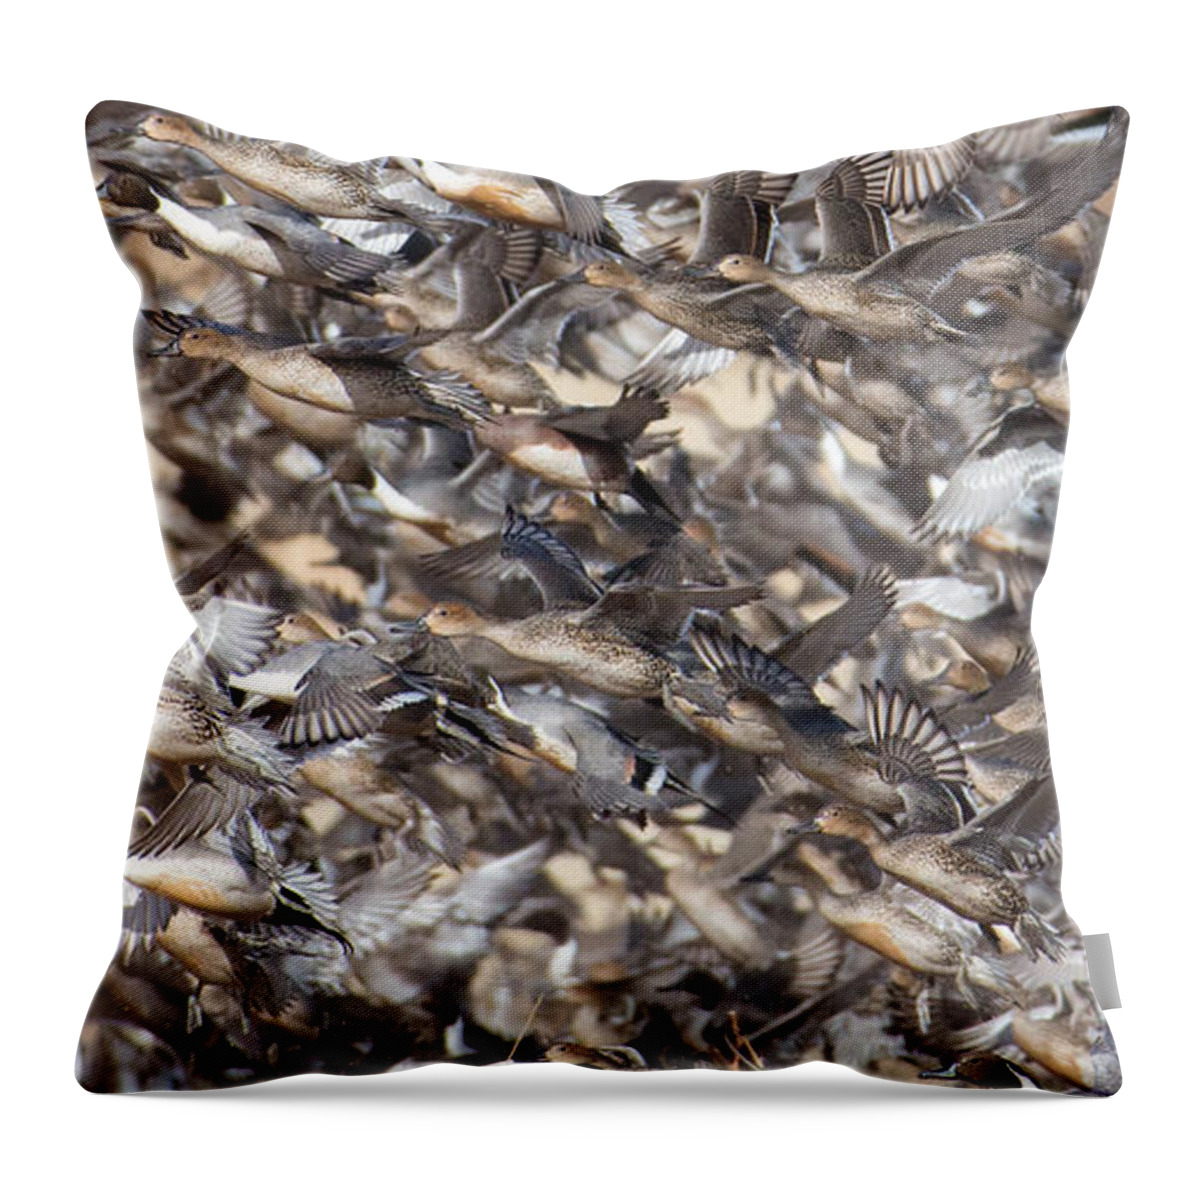 Duck Throw Pillow featuring the photograph Delightful Duck Pandemonium by Lisa Manifold